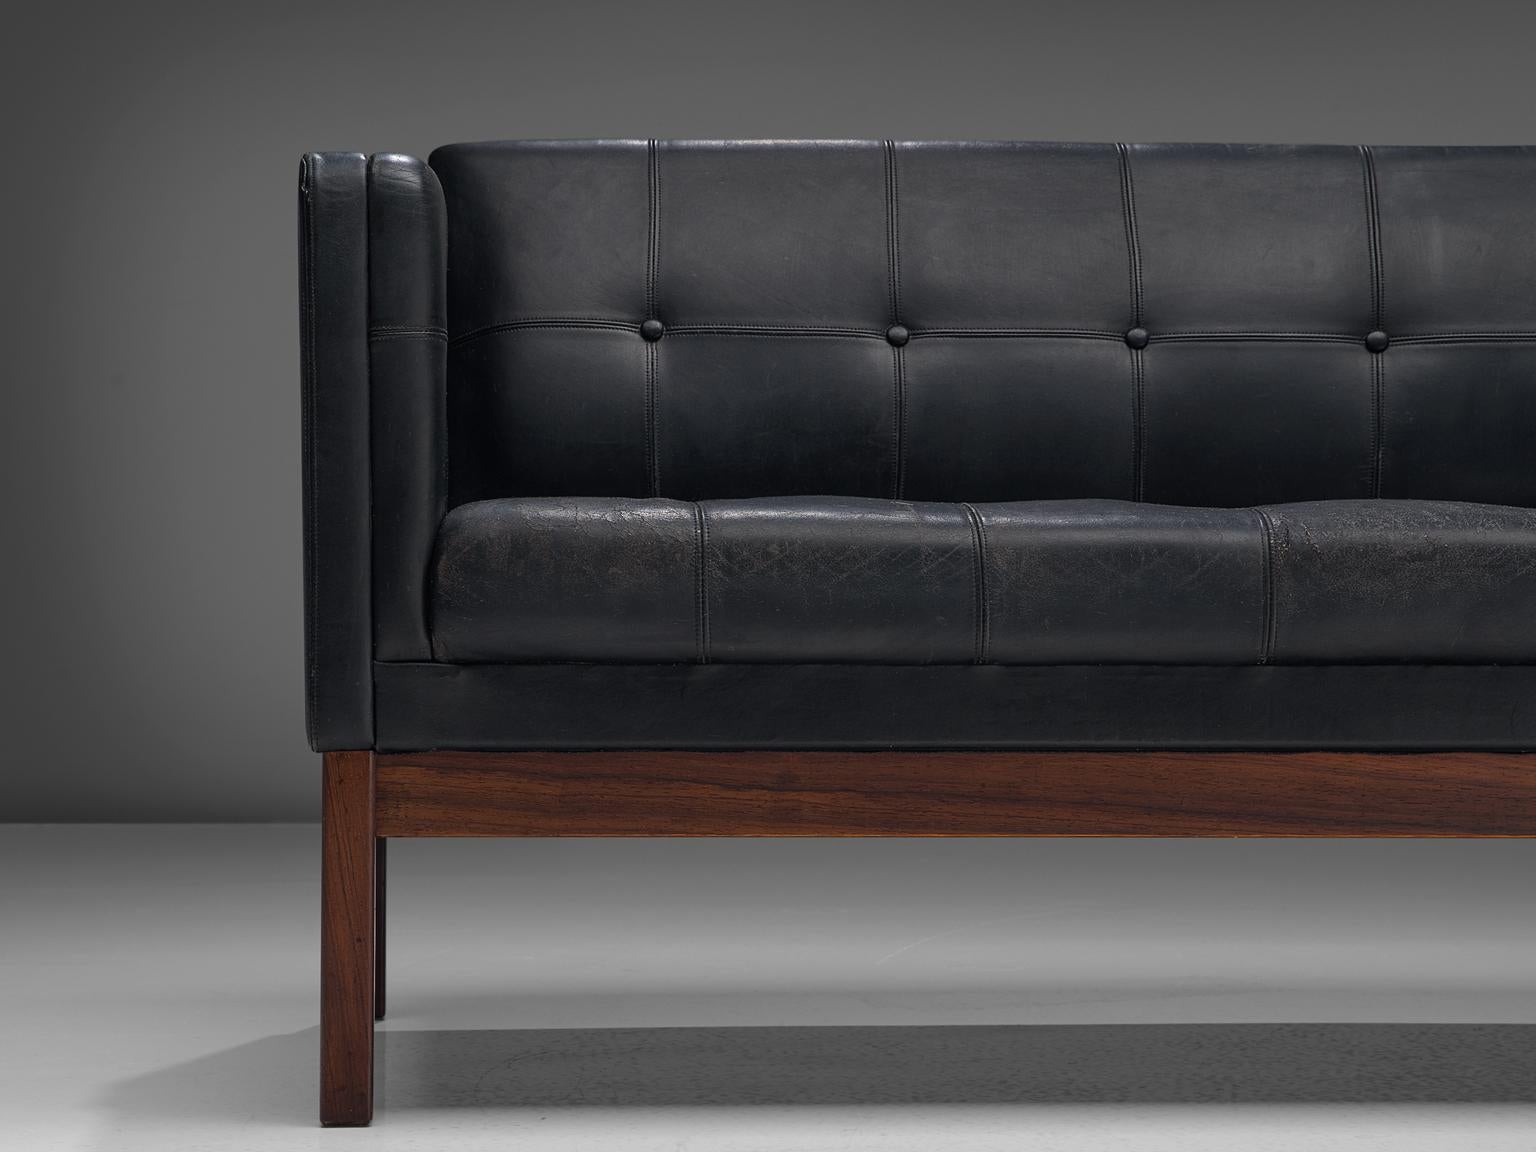 Mid-20th Century Danish Black Leather Sofa with Rosewood Frame, 1960s